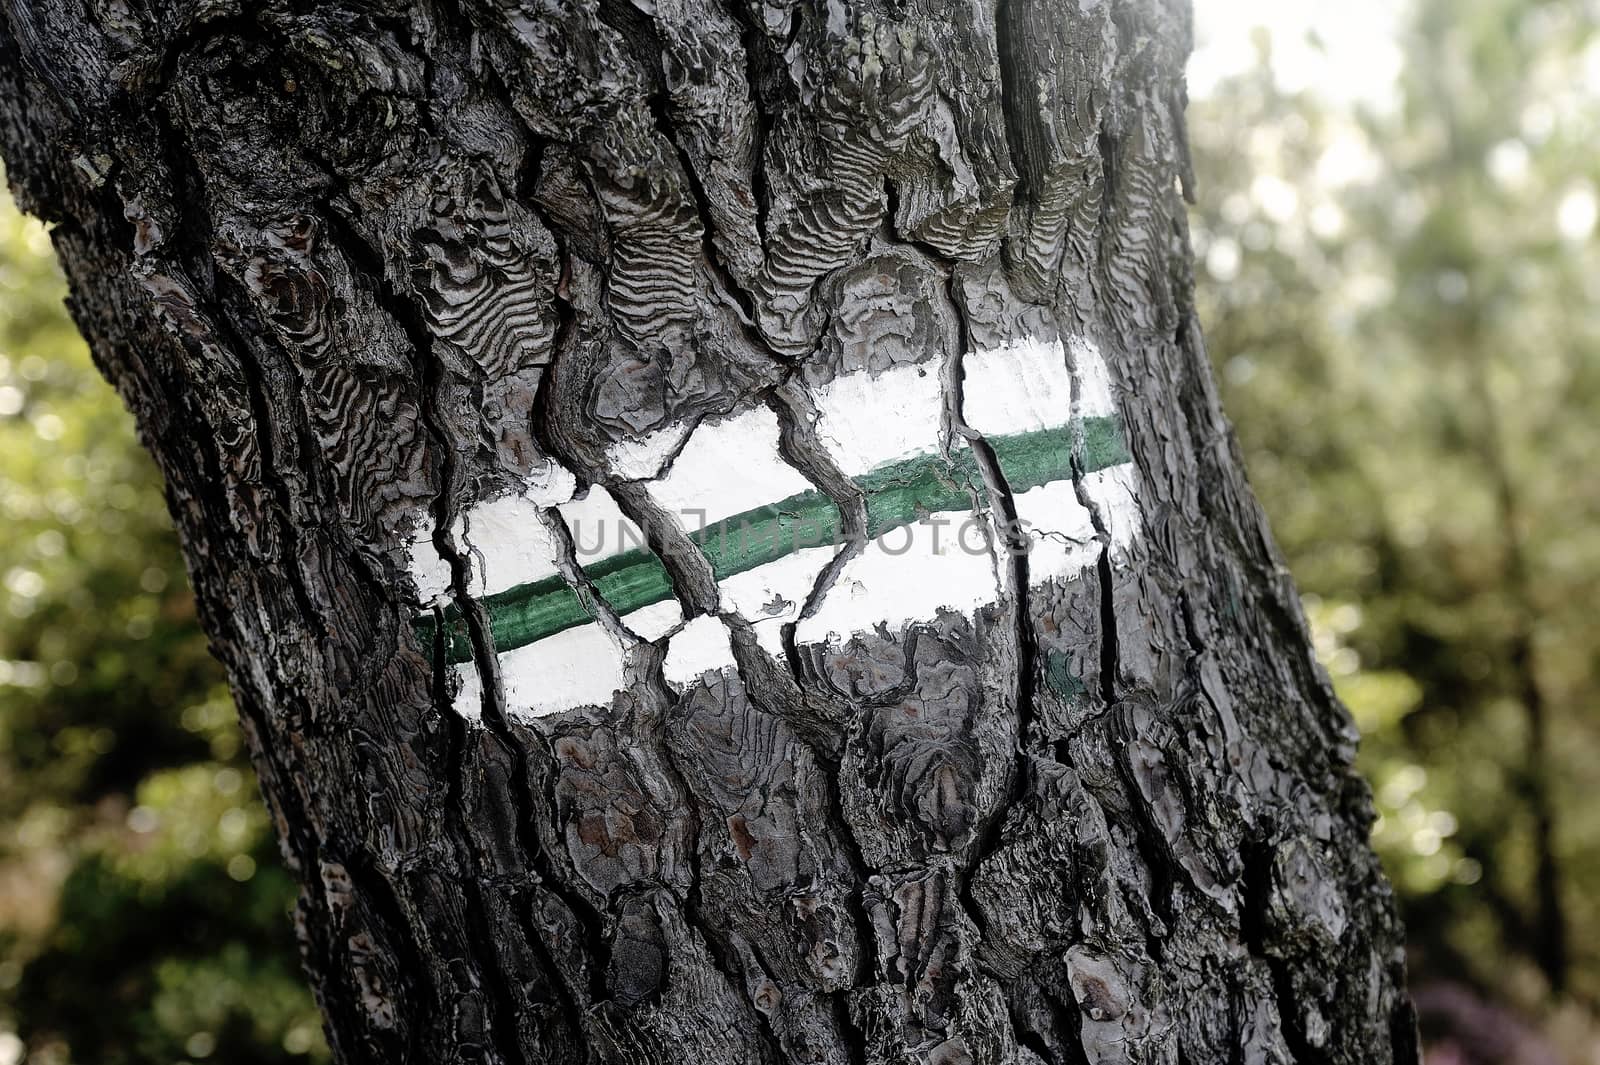 Tagging hiking path to the green and white paint on a tree trunk.